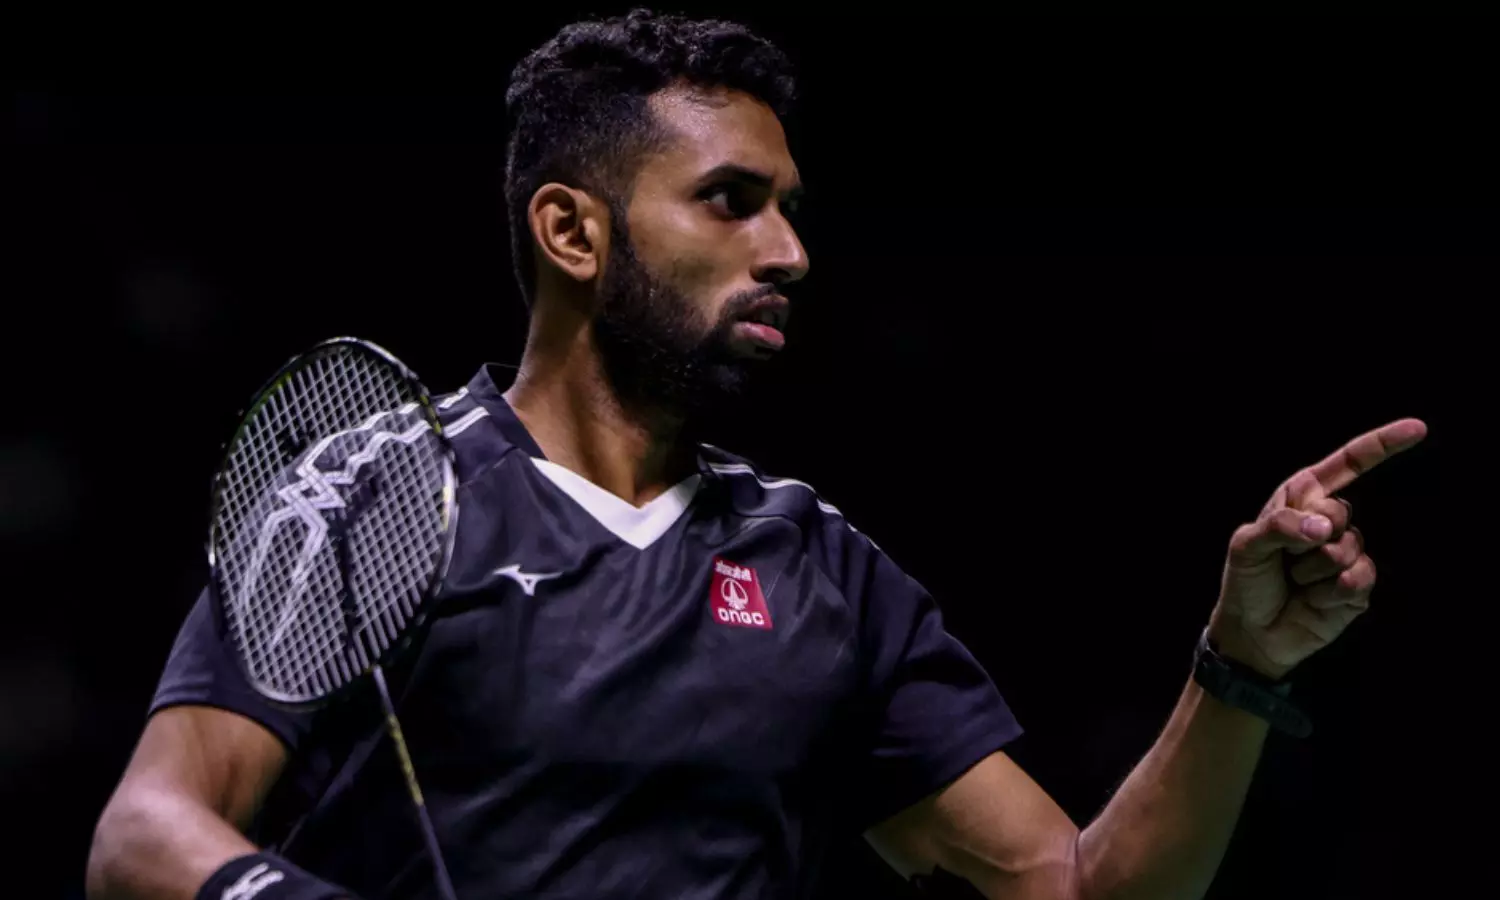 Taipei Open 2023 HS Prannoy knocked out in quarters — Highlights